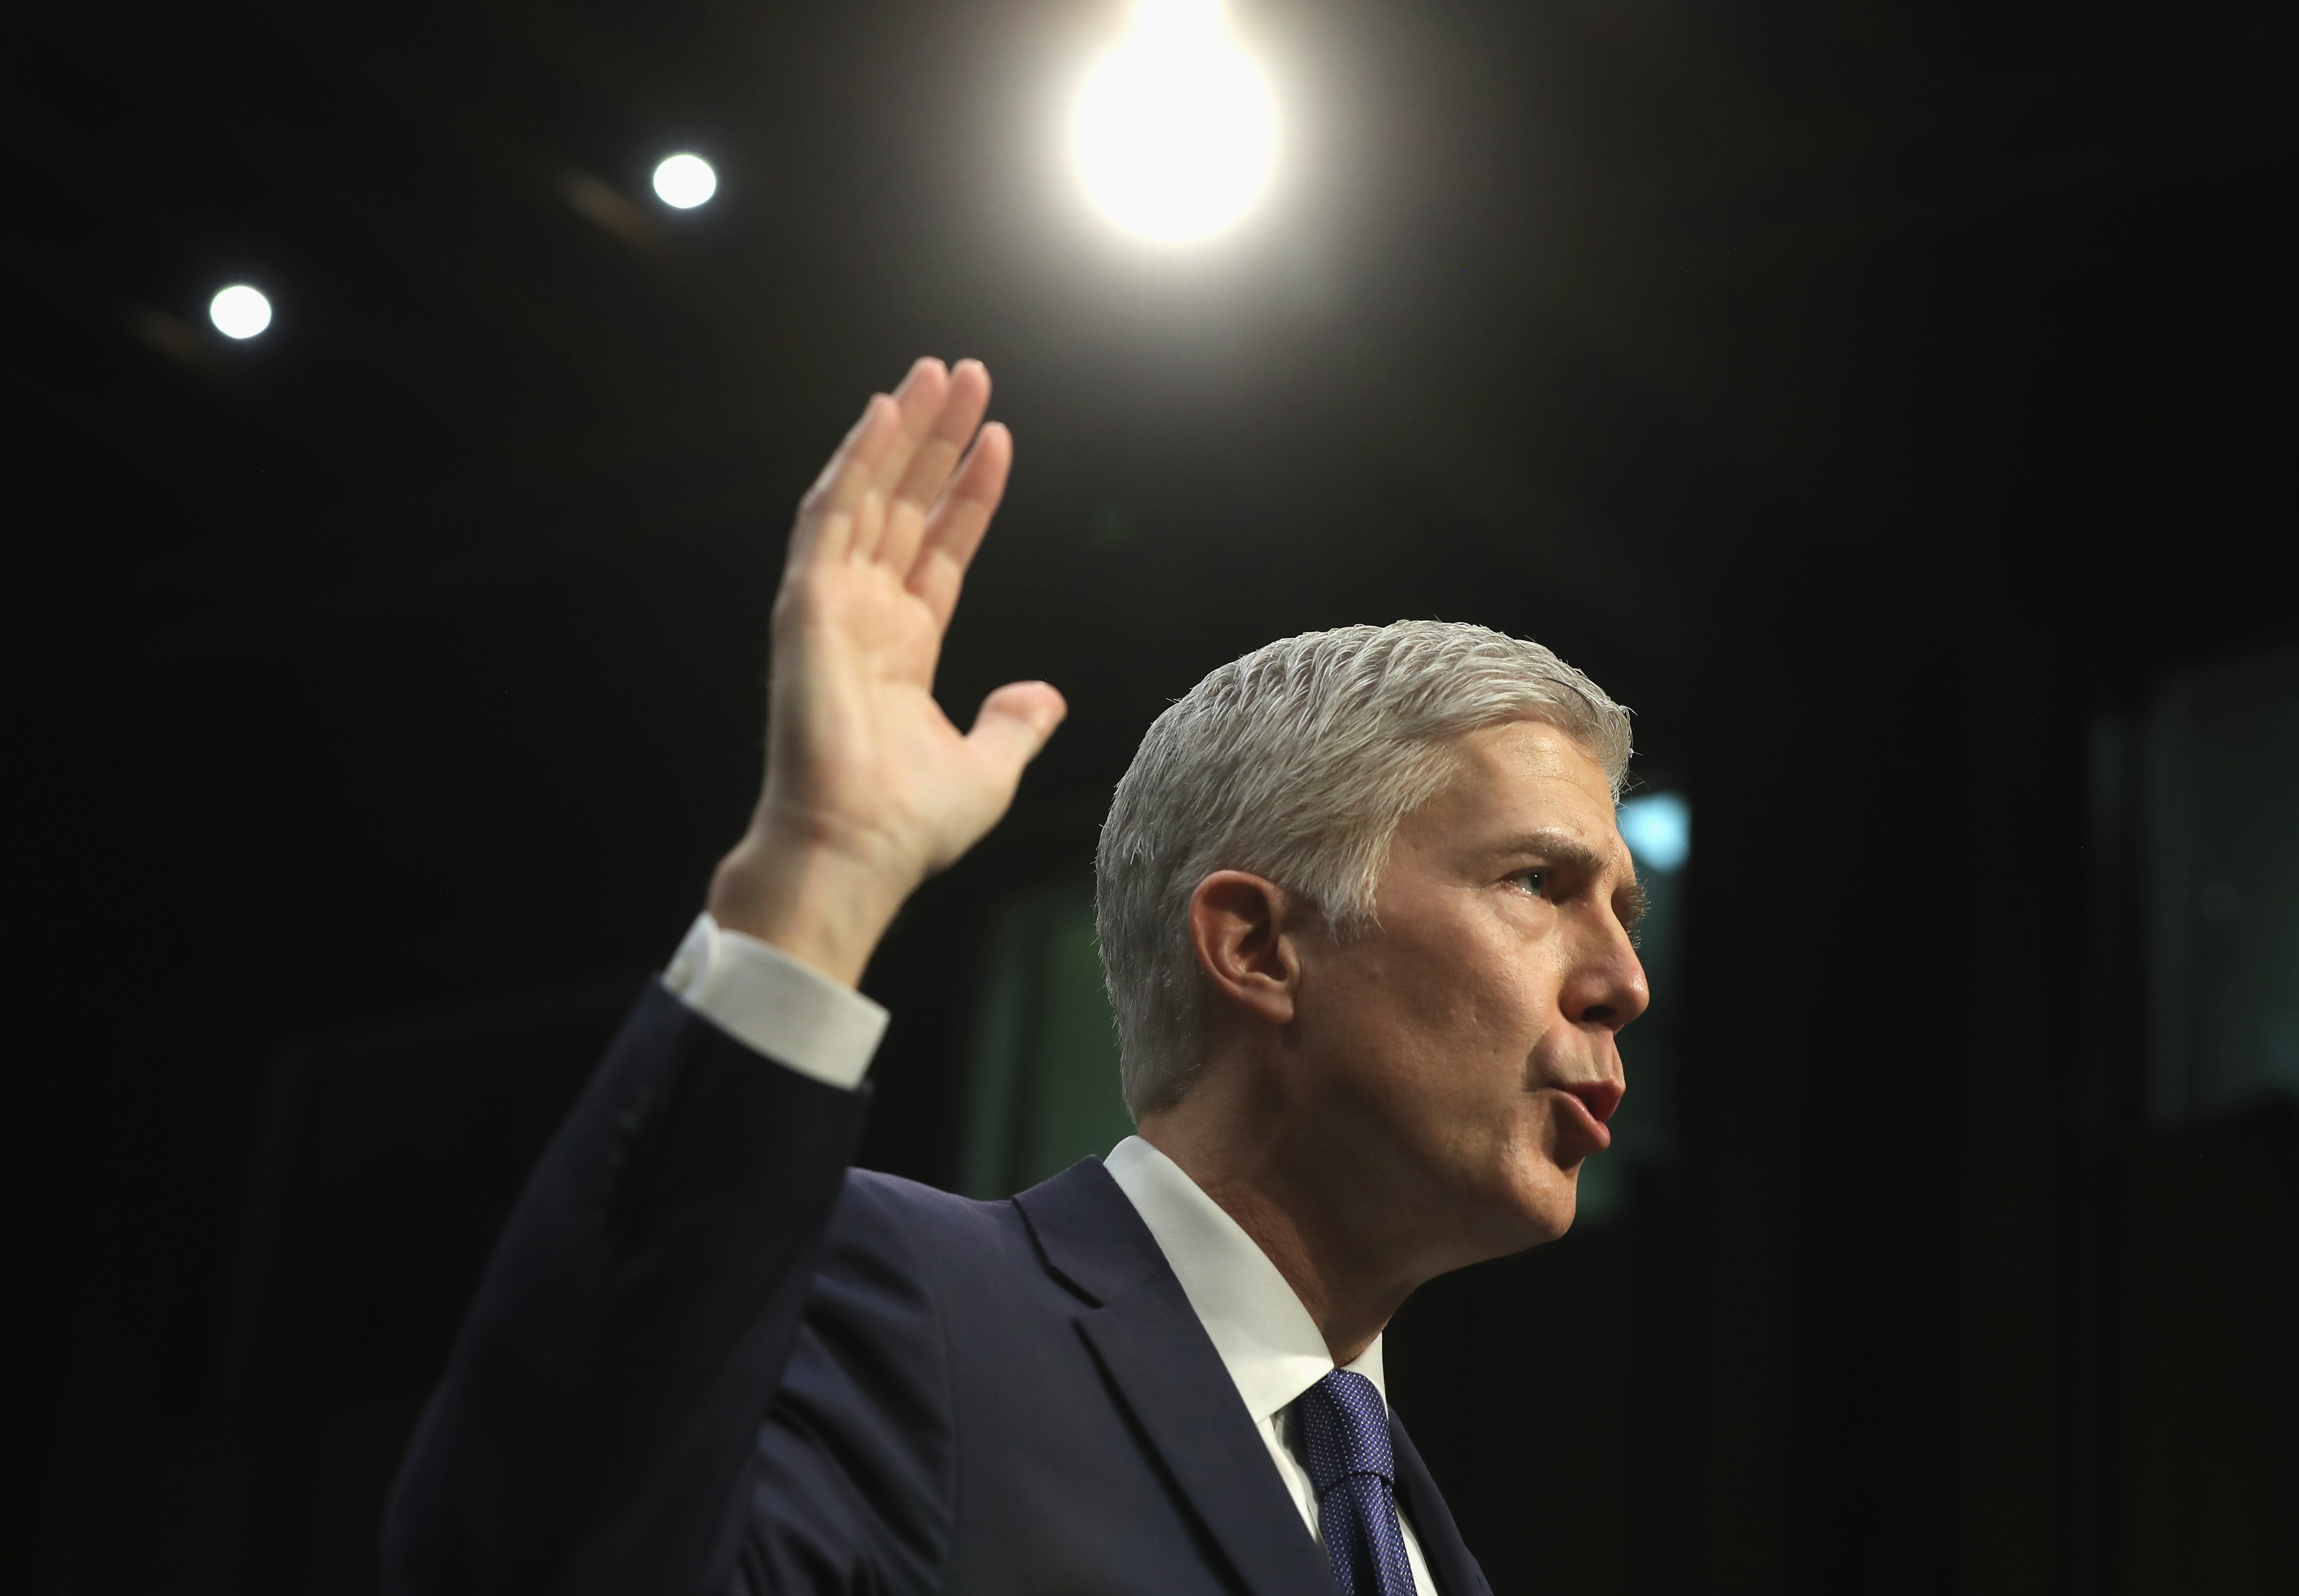 Judge Neil Gorsuch is sworn in on the first day of his Supreme Court confirmation hearing before the Senate Judiciary Committee in the Hart Senate Office Building on Capitol Hill March 20, 2017 in Washington, D.C. (Justin Sullivan&mdash;Getty Images)